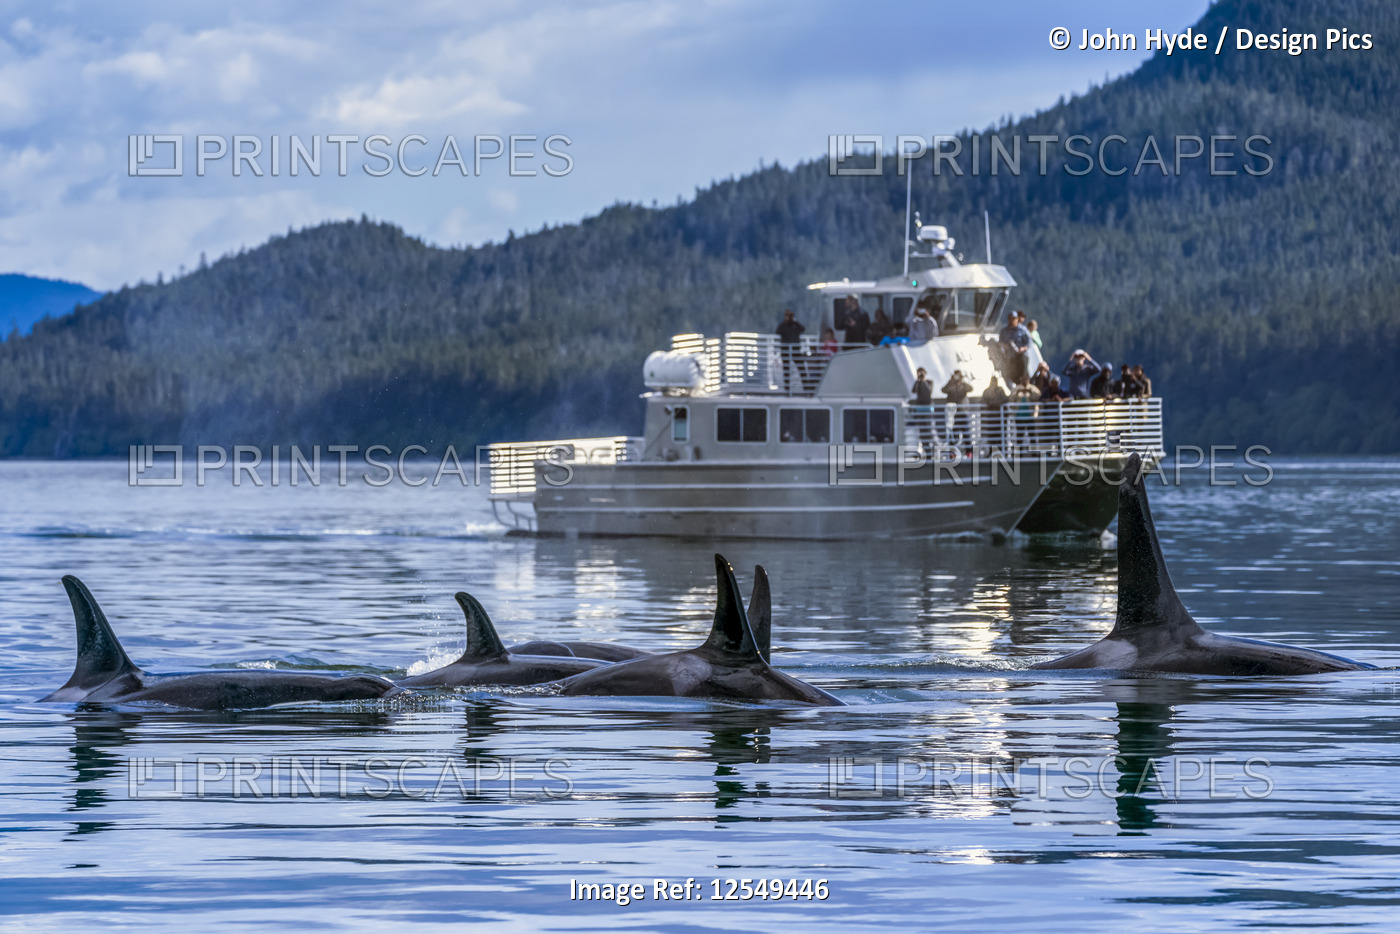 Wildlife sightseeing tour watches Orca whales (Orcinus orca) near Juneau, ...